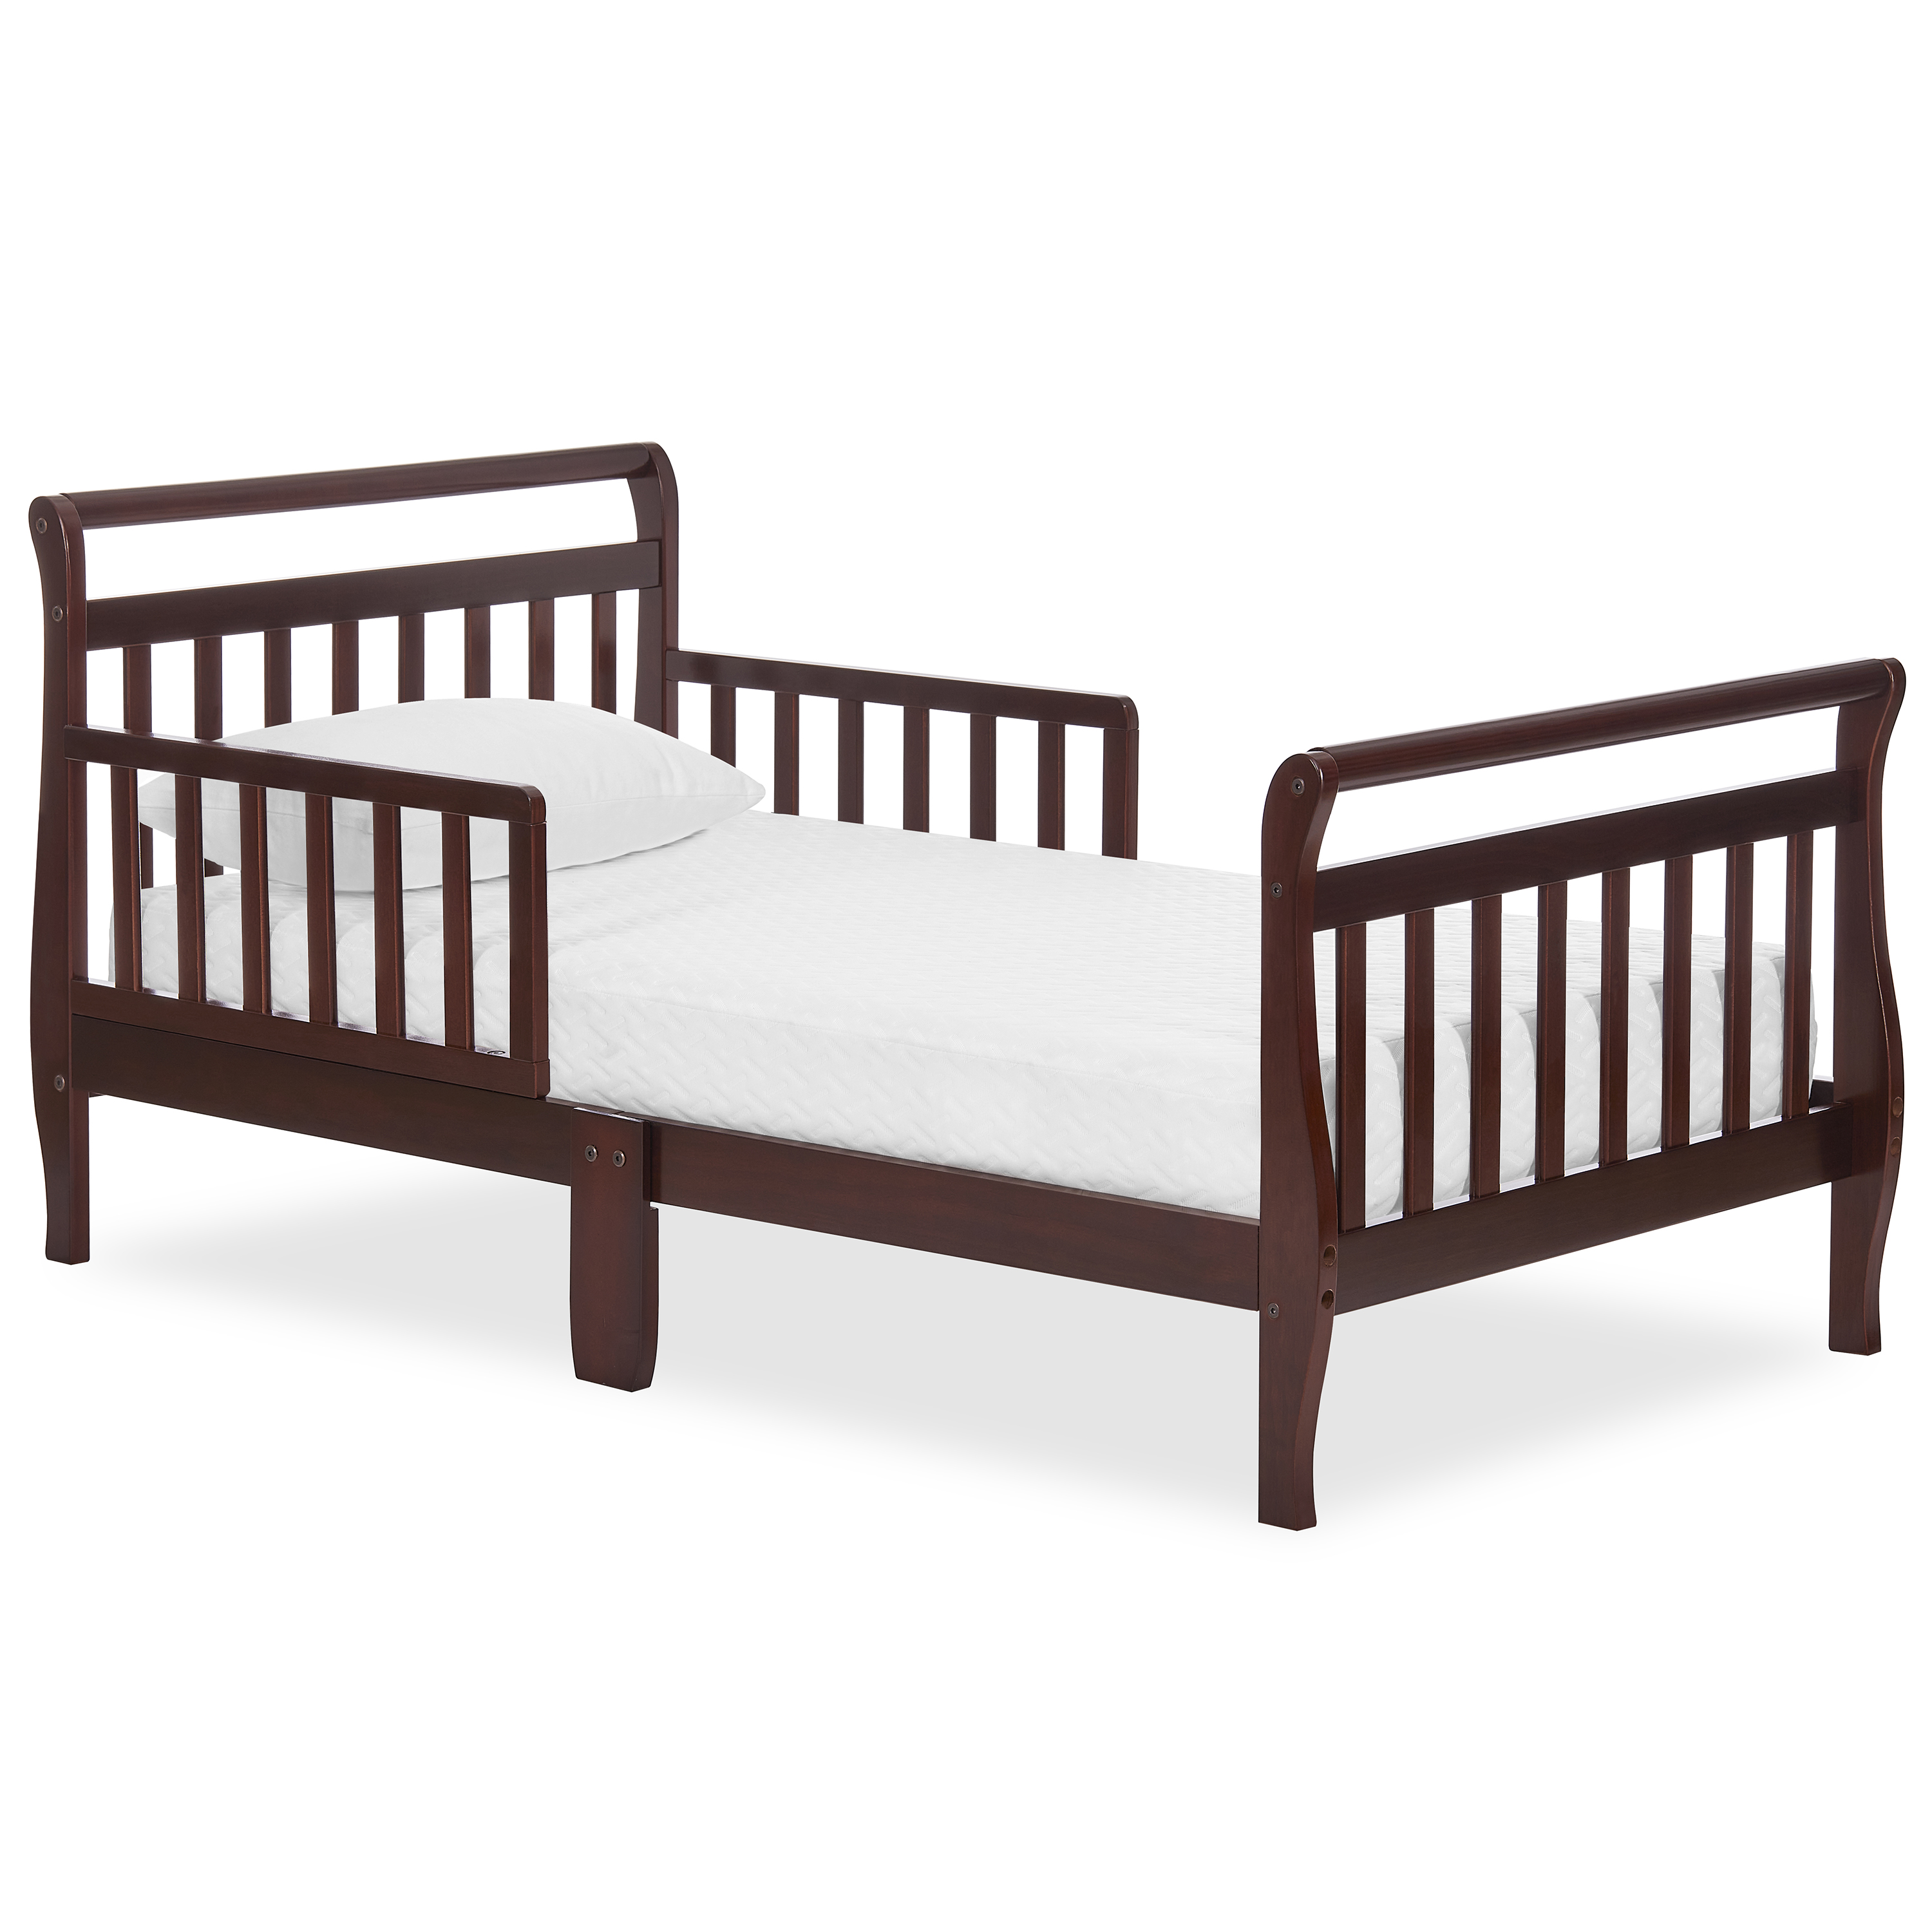 Dream On Me, Sleigh Toddler Bed, Cherry, Model #642-C - image 5 of 14